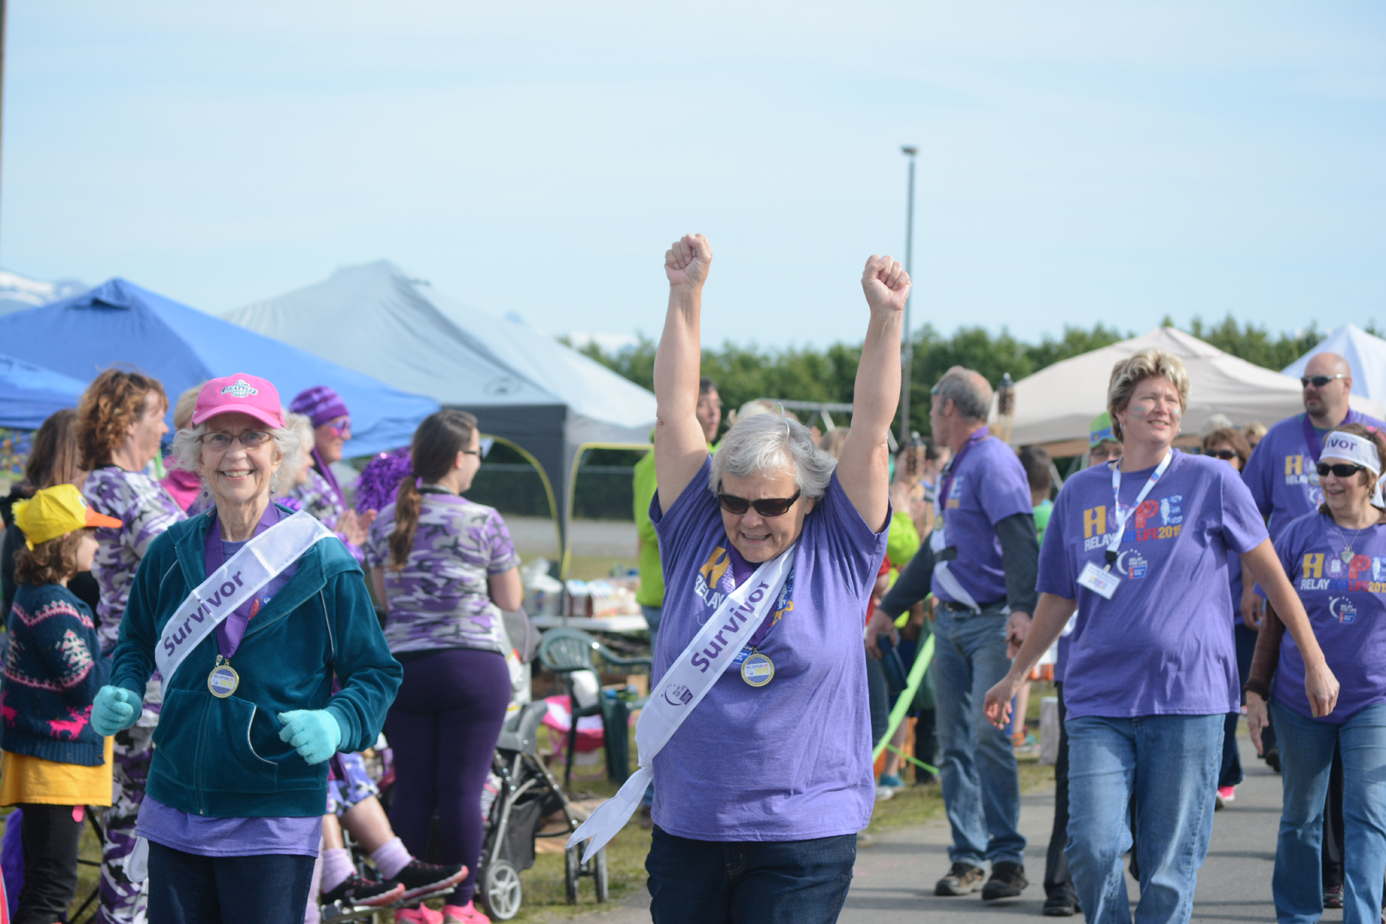 Diann Martin, center, cheers as she and Nancy Branch, left, take a lap during the survivors walk at Relay for Life last Friday at West Homer Elementary School.-Photo by Michael Armstrong, Homer News